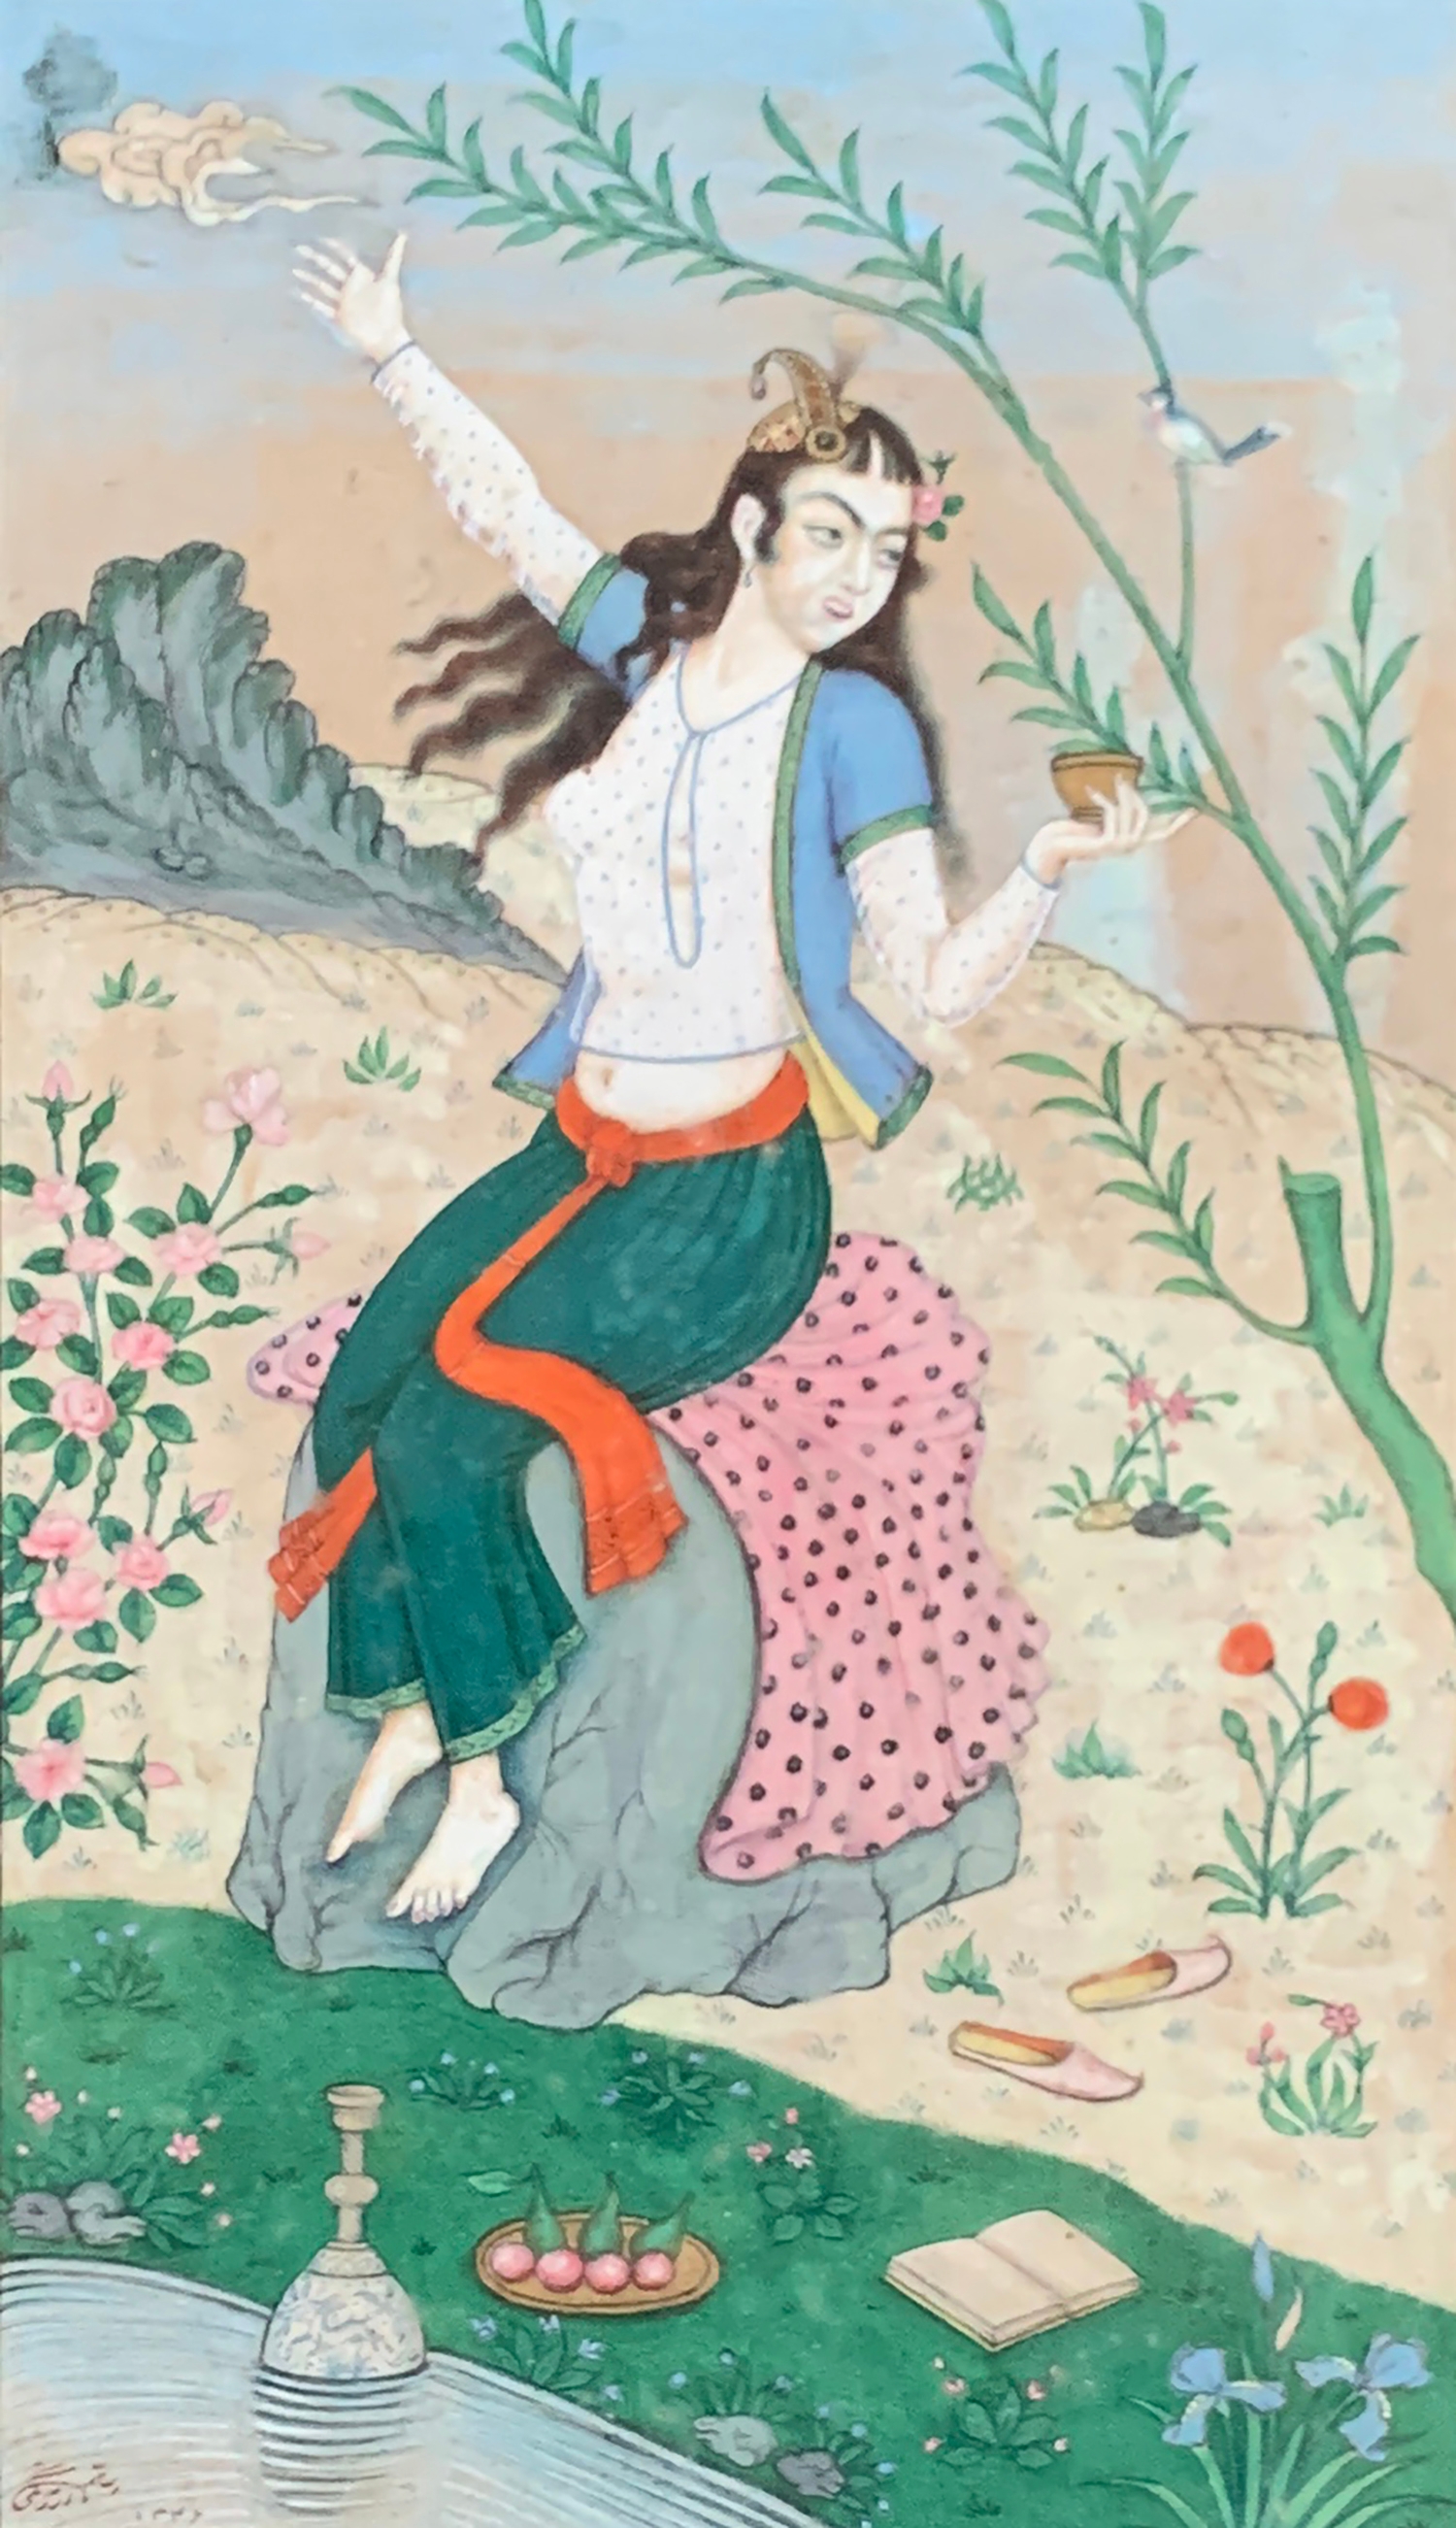 A painting from a Ragamala series, possibly Kukubha Ragini, gouache on paper, depicting a barefooted